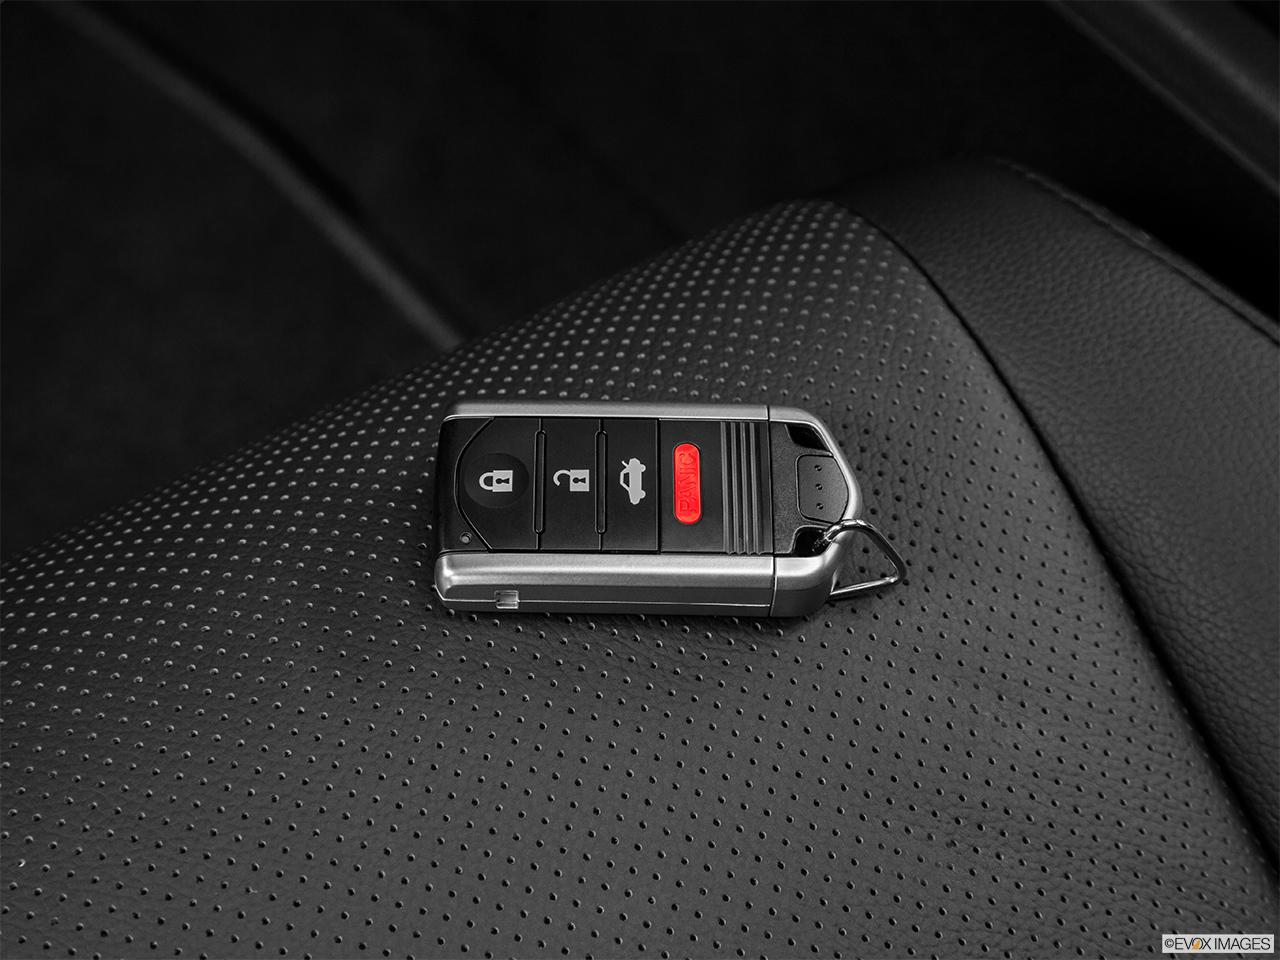 2015 Acura ILX 6-Speed Manual Key fob on driver's seat. 